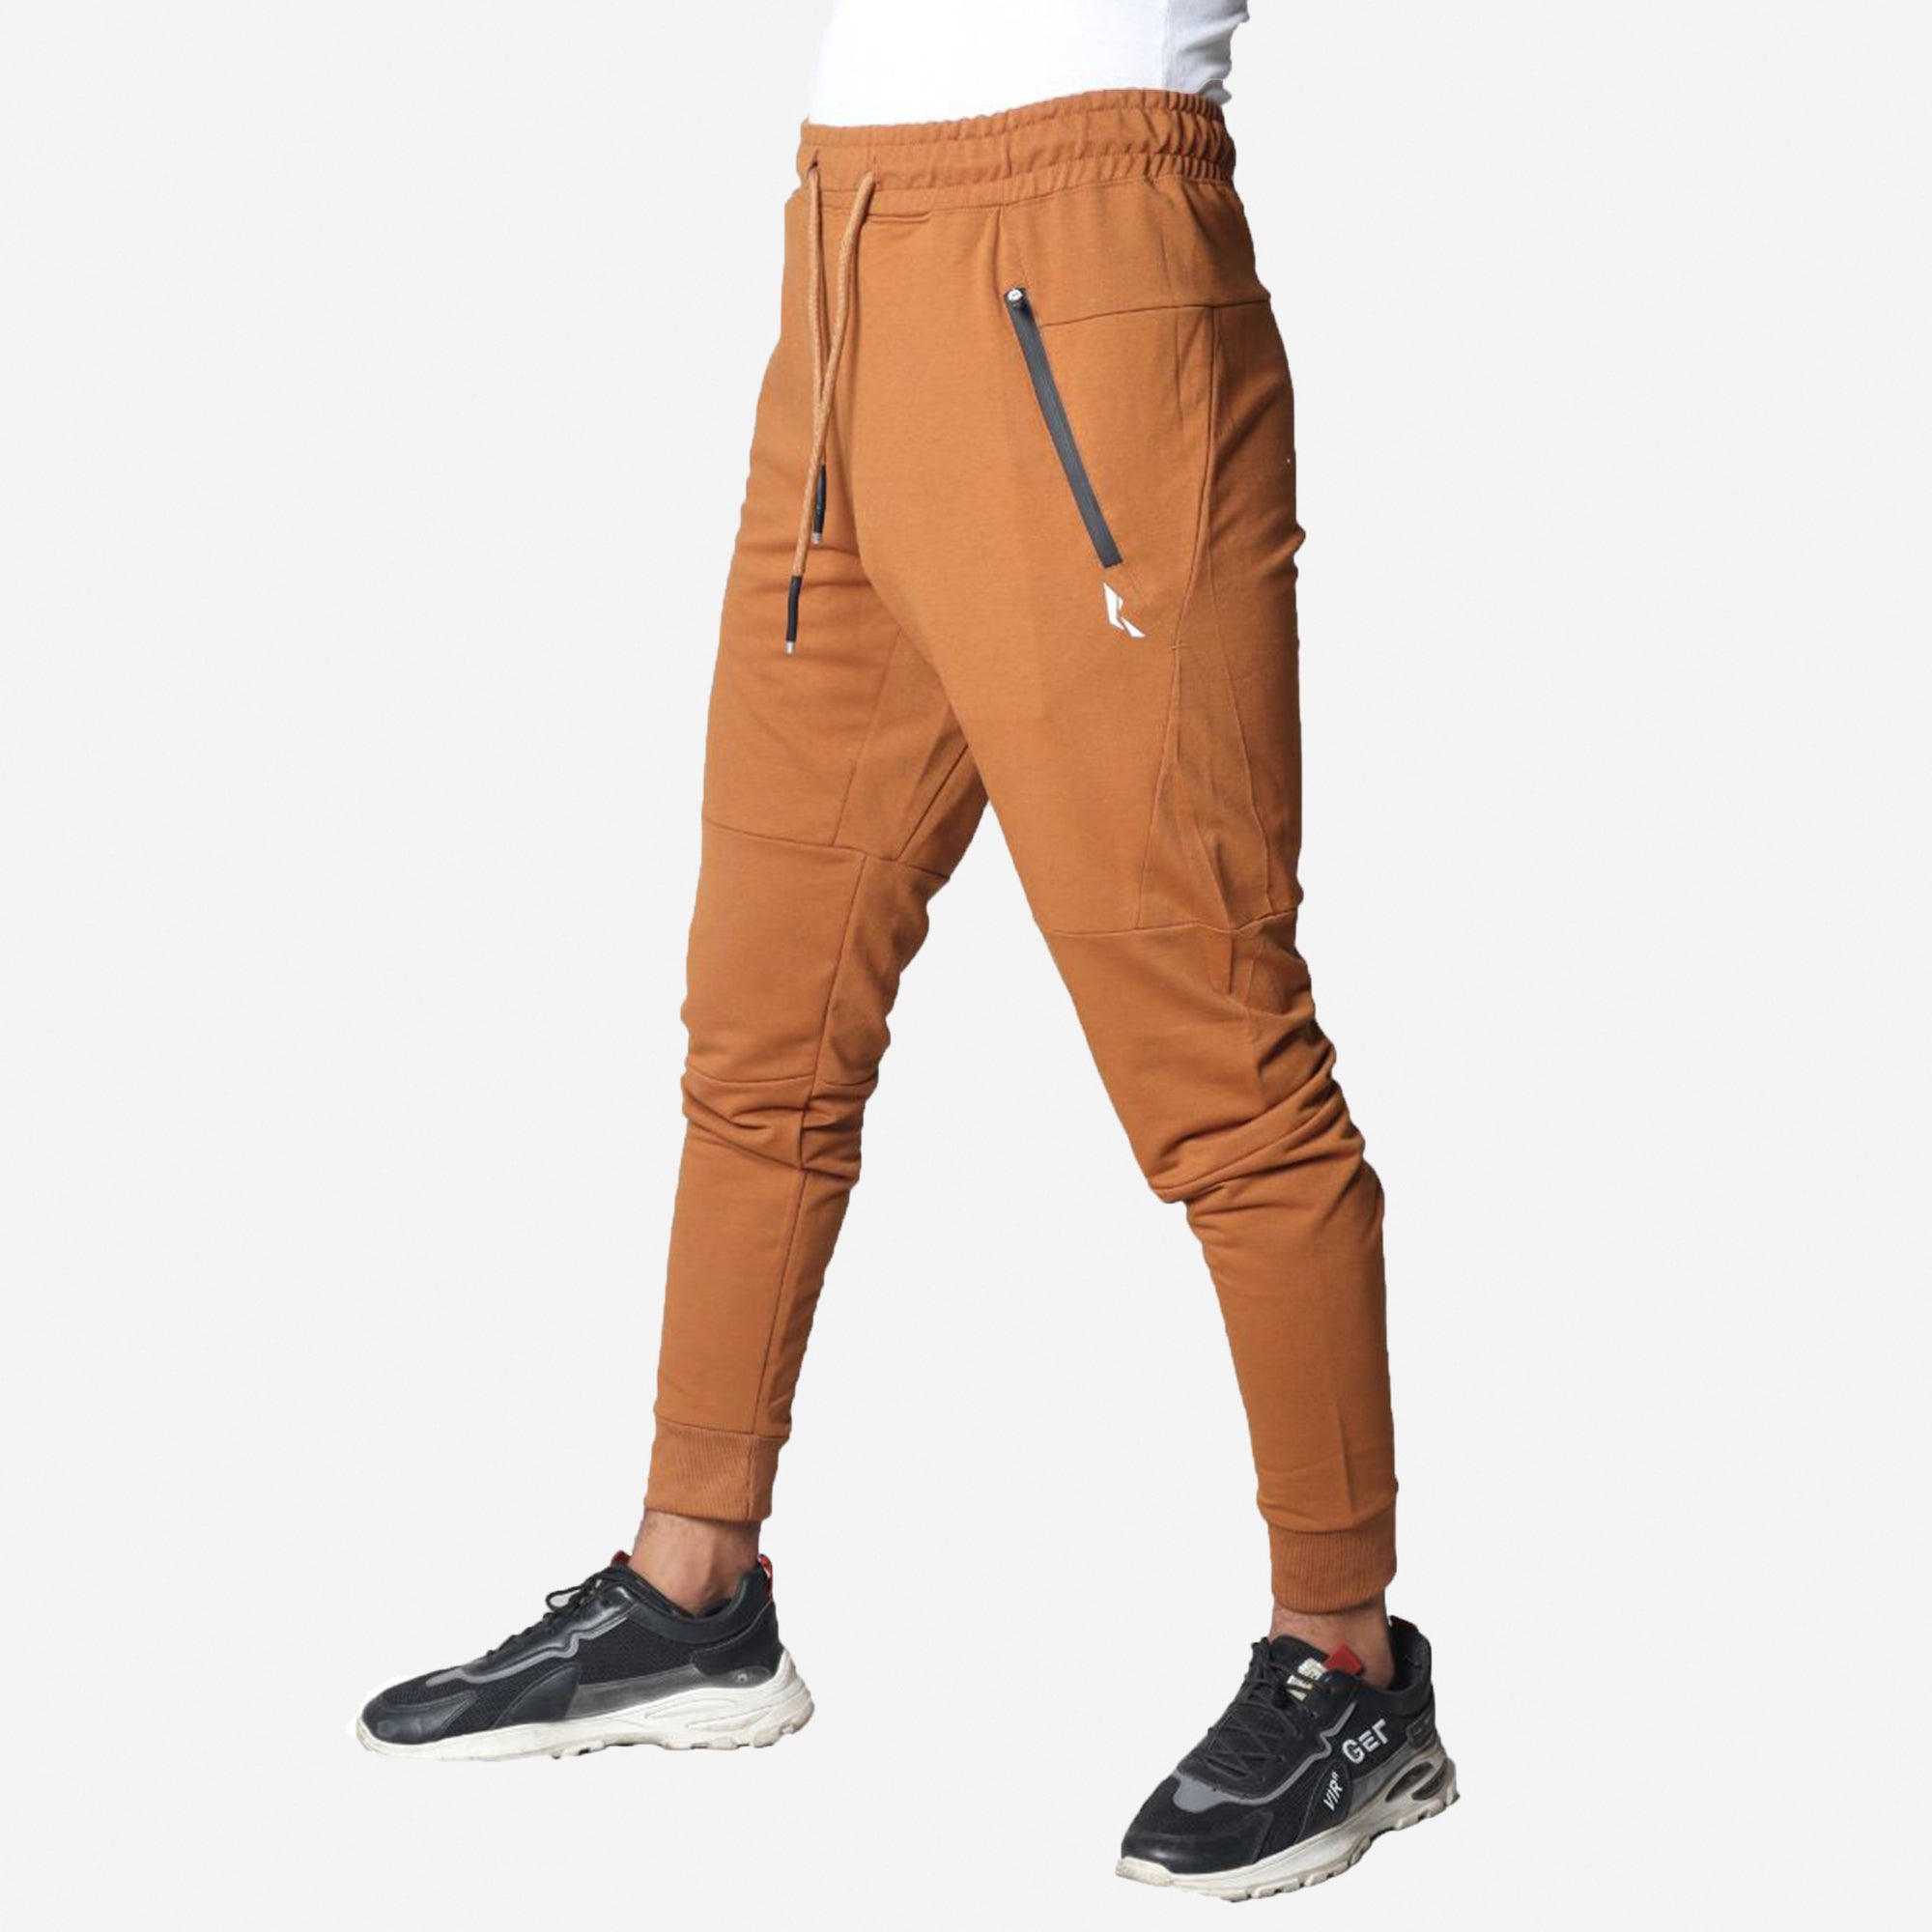 French Terry Trousers For Sports Casual Fitness Jogging - Caramel